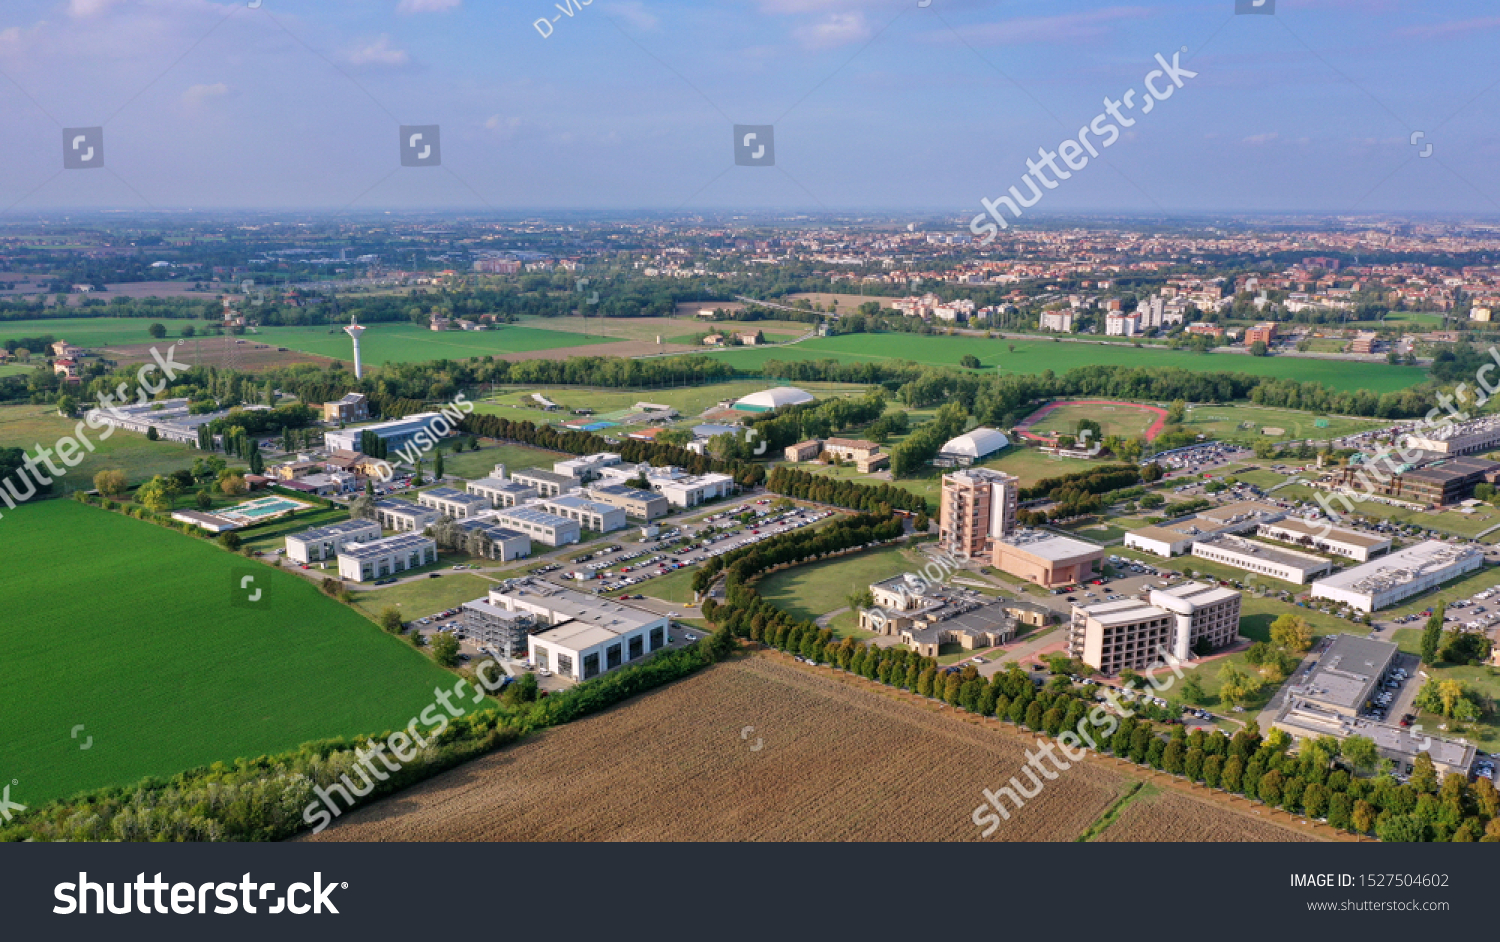 Parma / Italy - 10/02/2019: Aerial view of the Campus of the University of Parma #1527504602